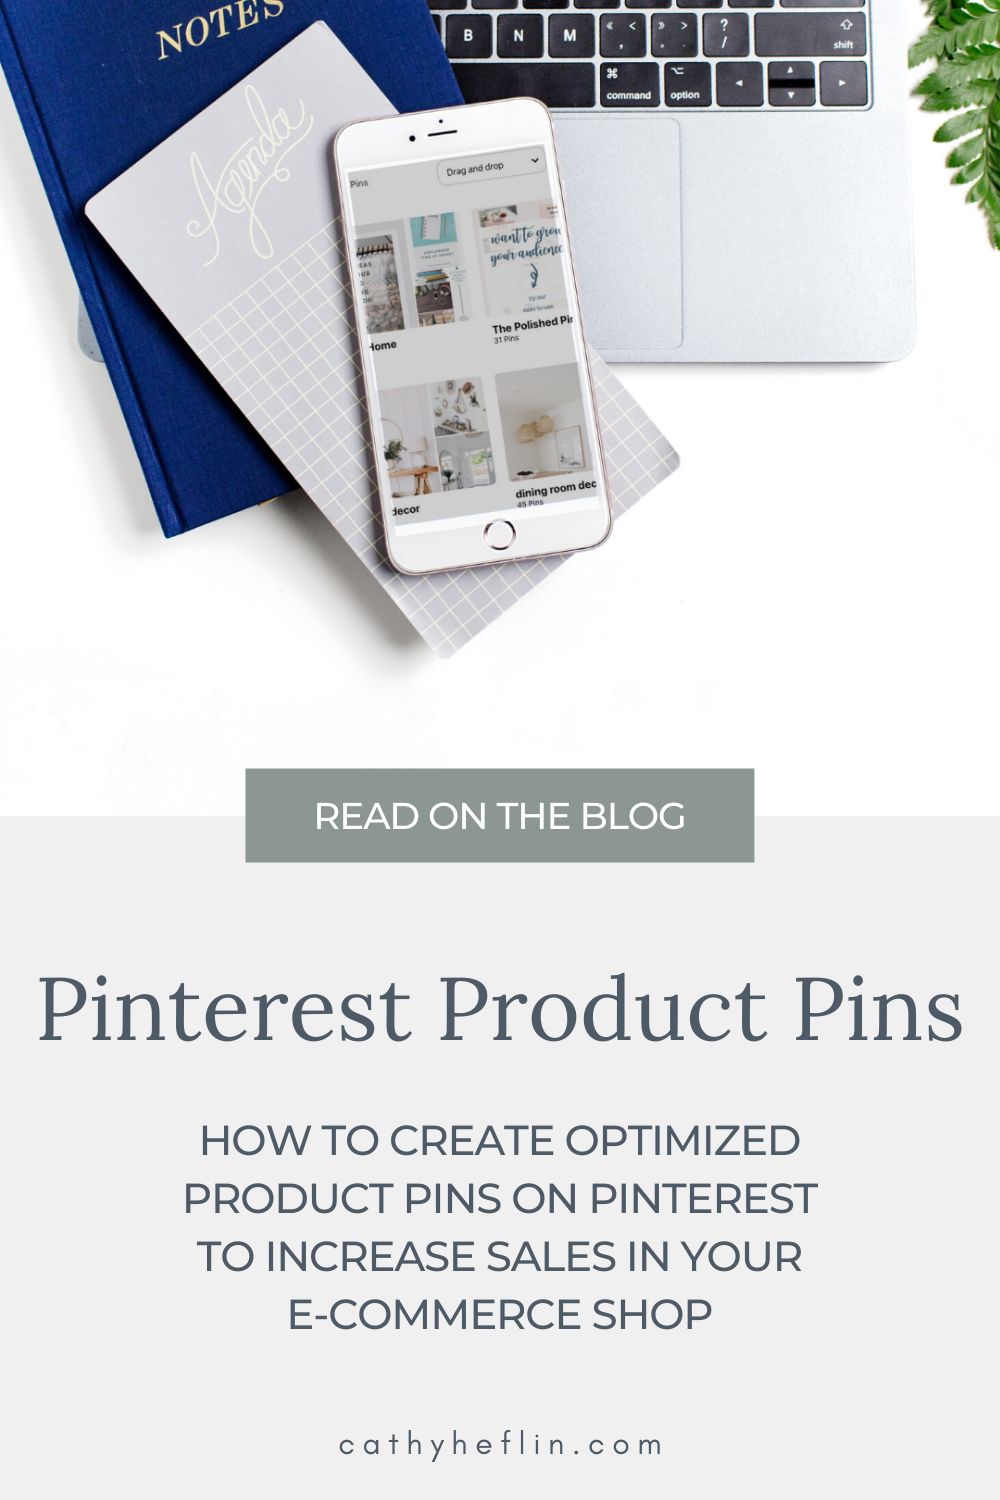 How to Create Pinterest Product Pins for E-Commerce Business